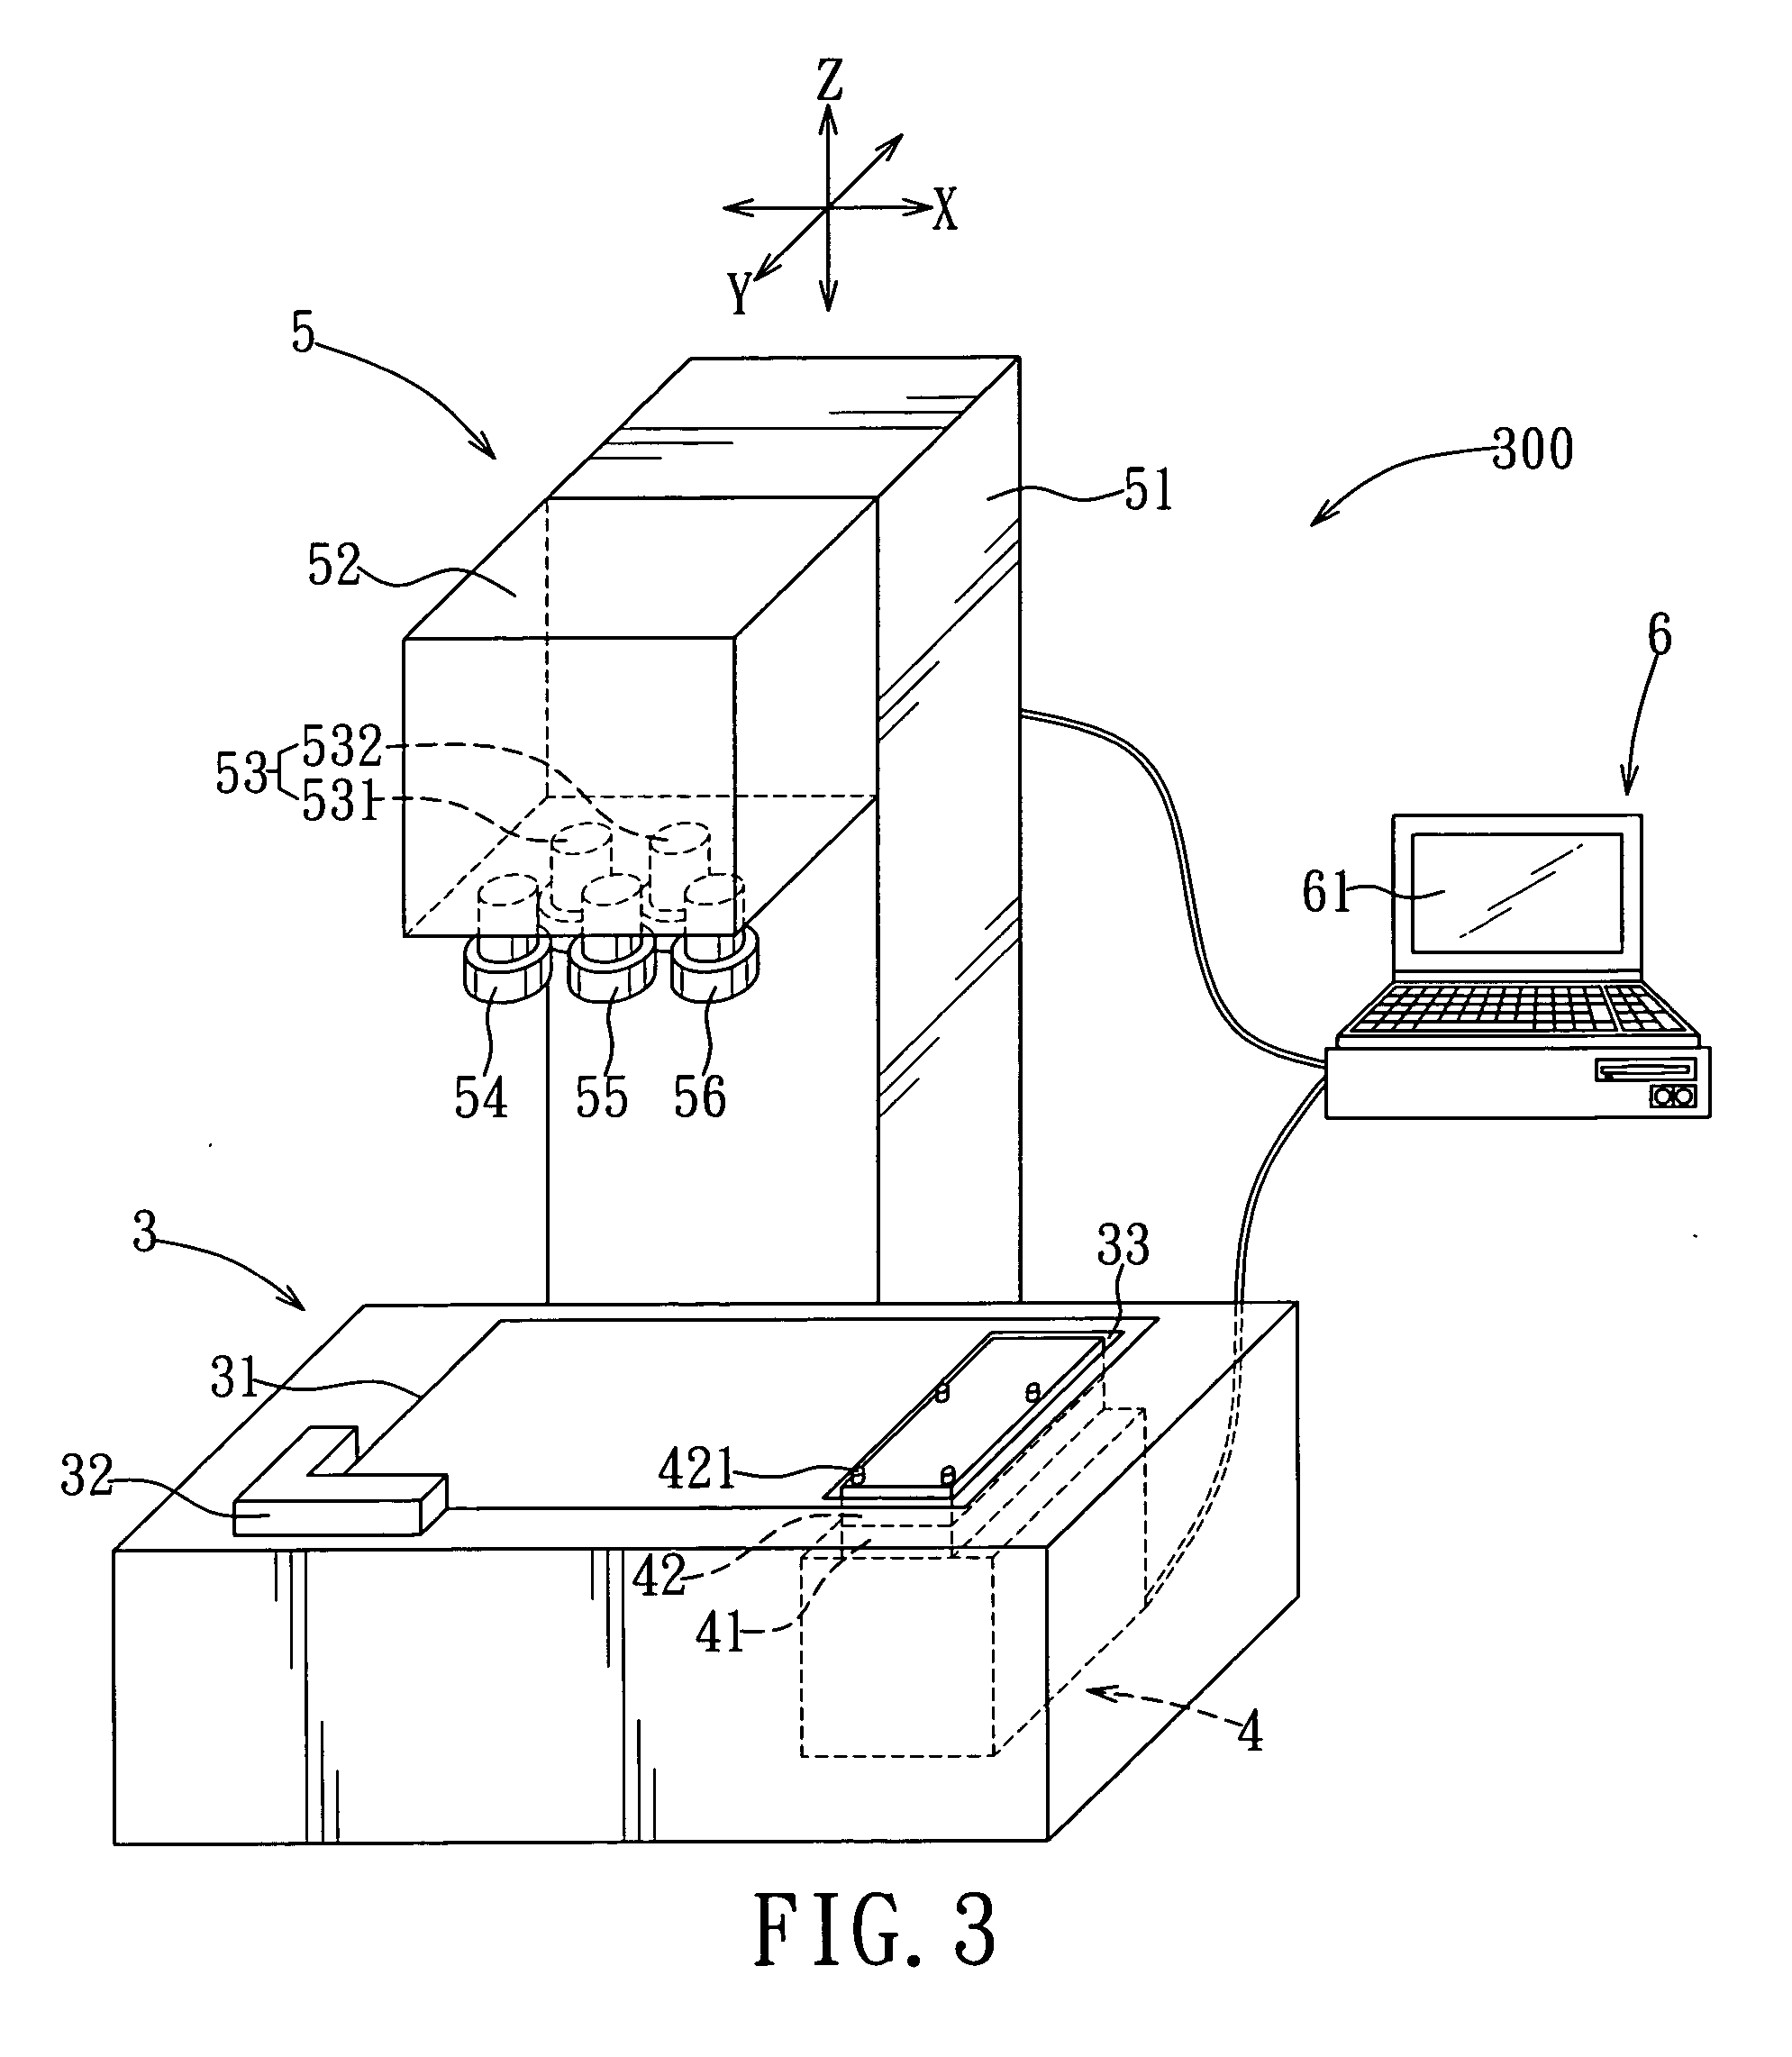 Board placement method and system for defective printed circuit board panel having multiple interconnected printed circuit board units